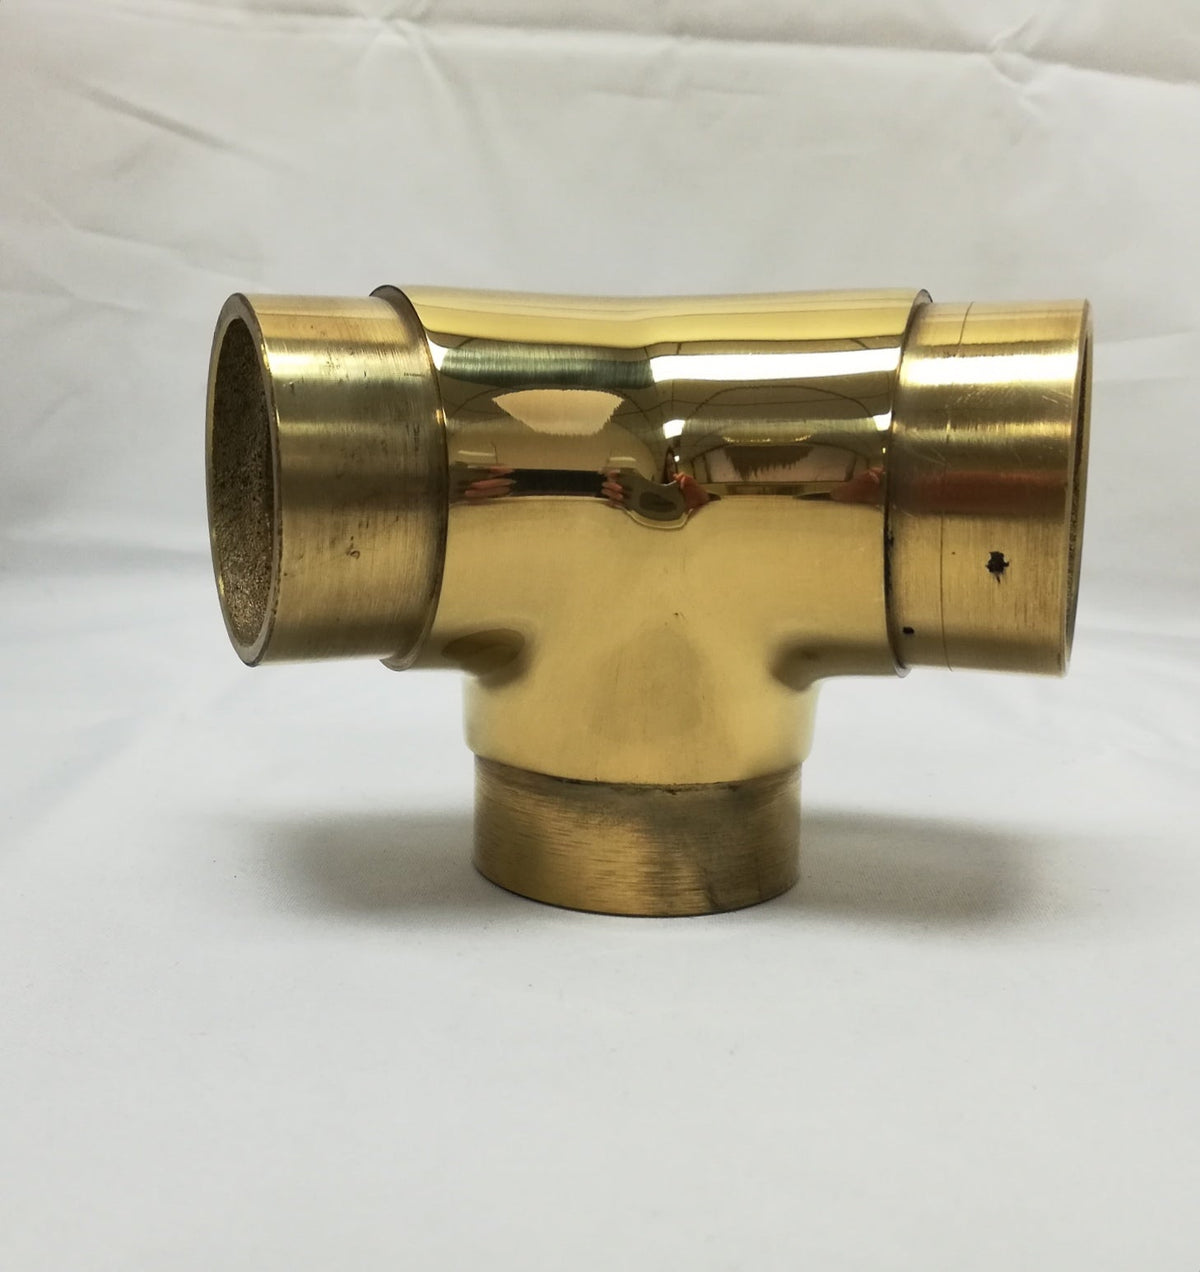 Flush 135° Side Outlet Elbow for 1-1/2" Tubing - Trade Diversified